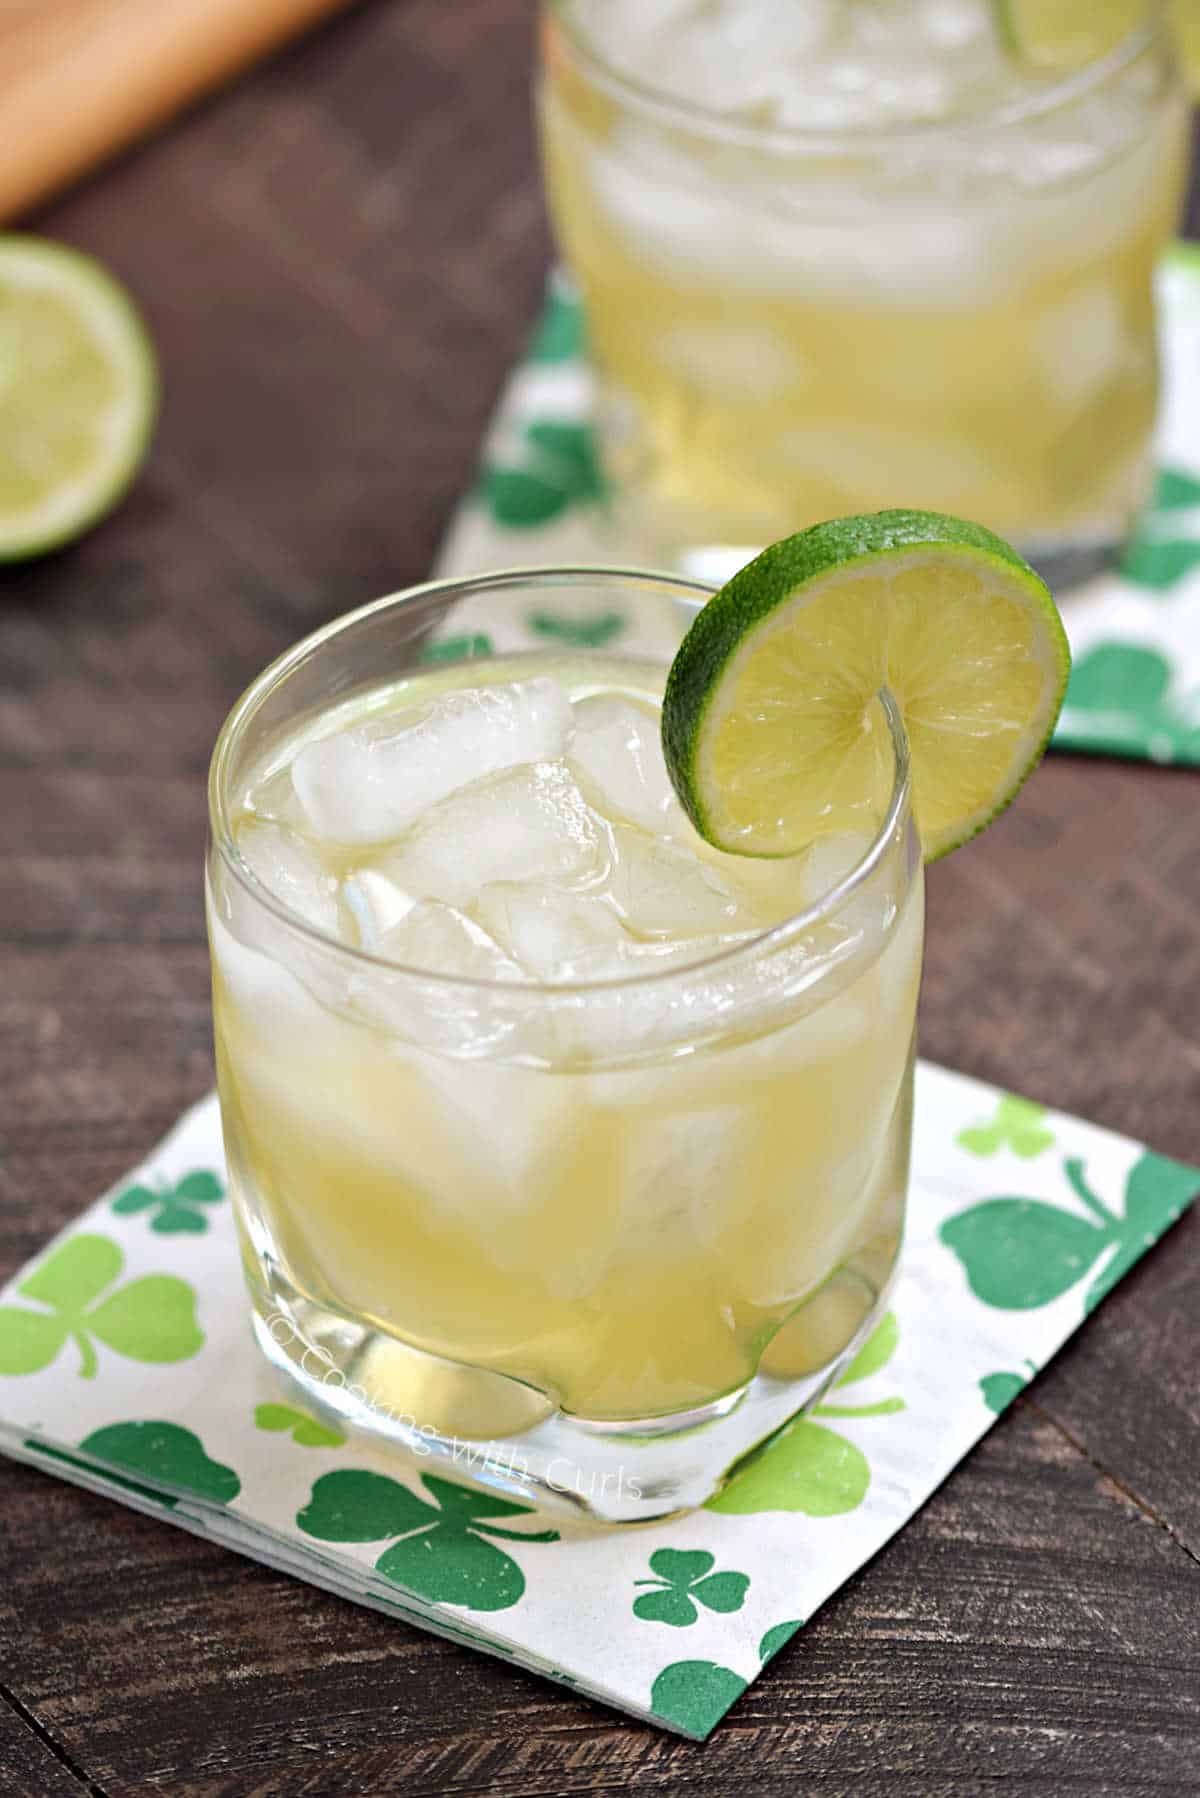 Jameson-whiskey-lime-juice-and-ginger-ale-with-lime-wheel-garnish.